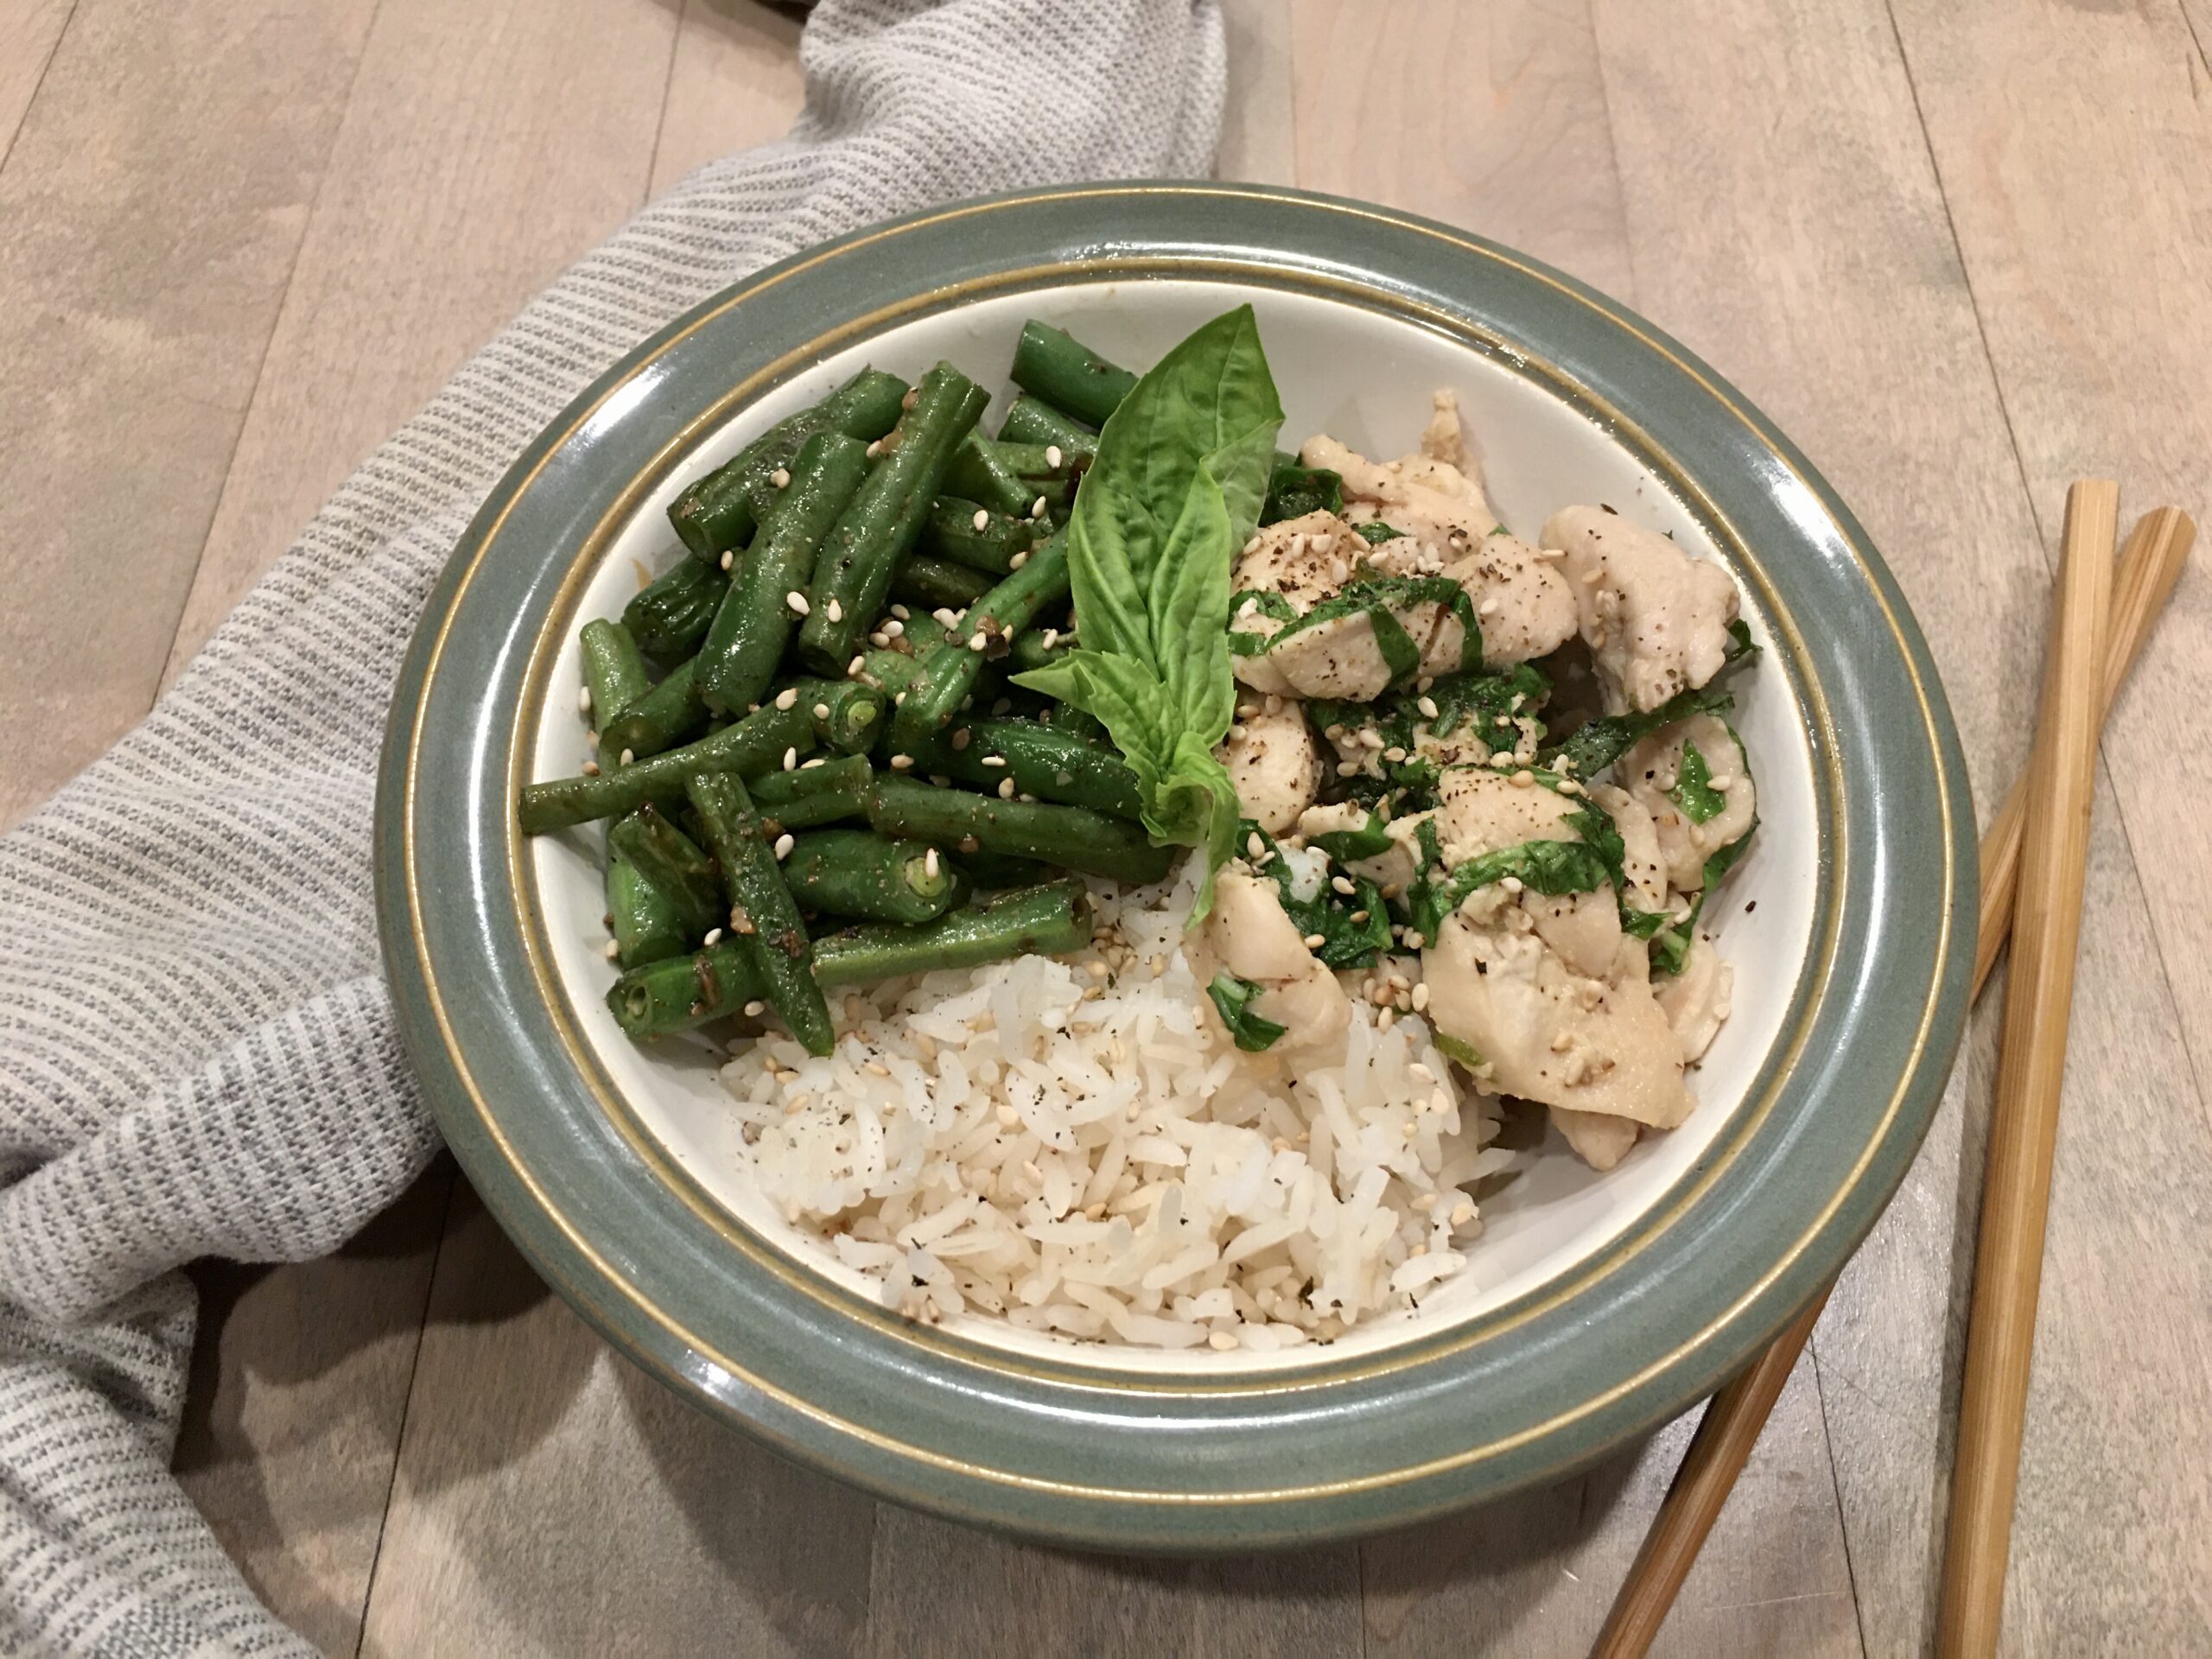 Chile, Basil & Chicken Stir-fry served in a bowl with a towel and chop sticks